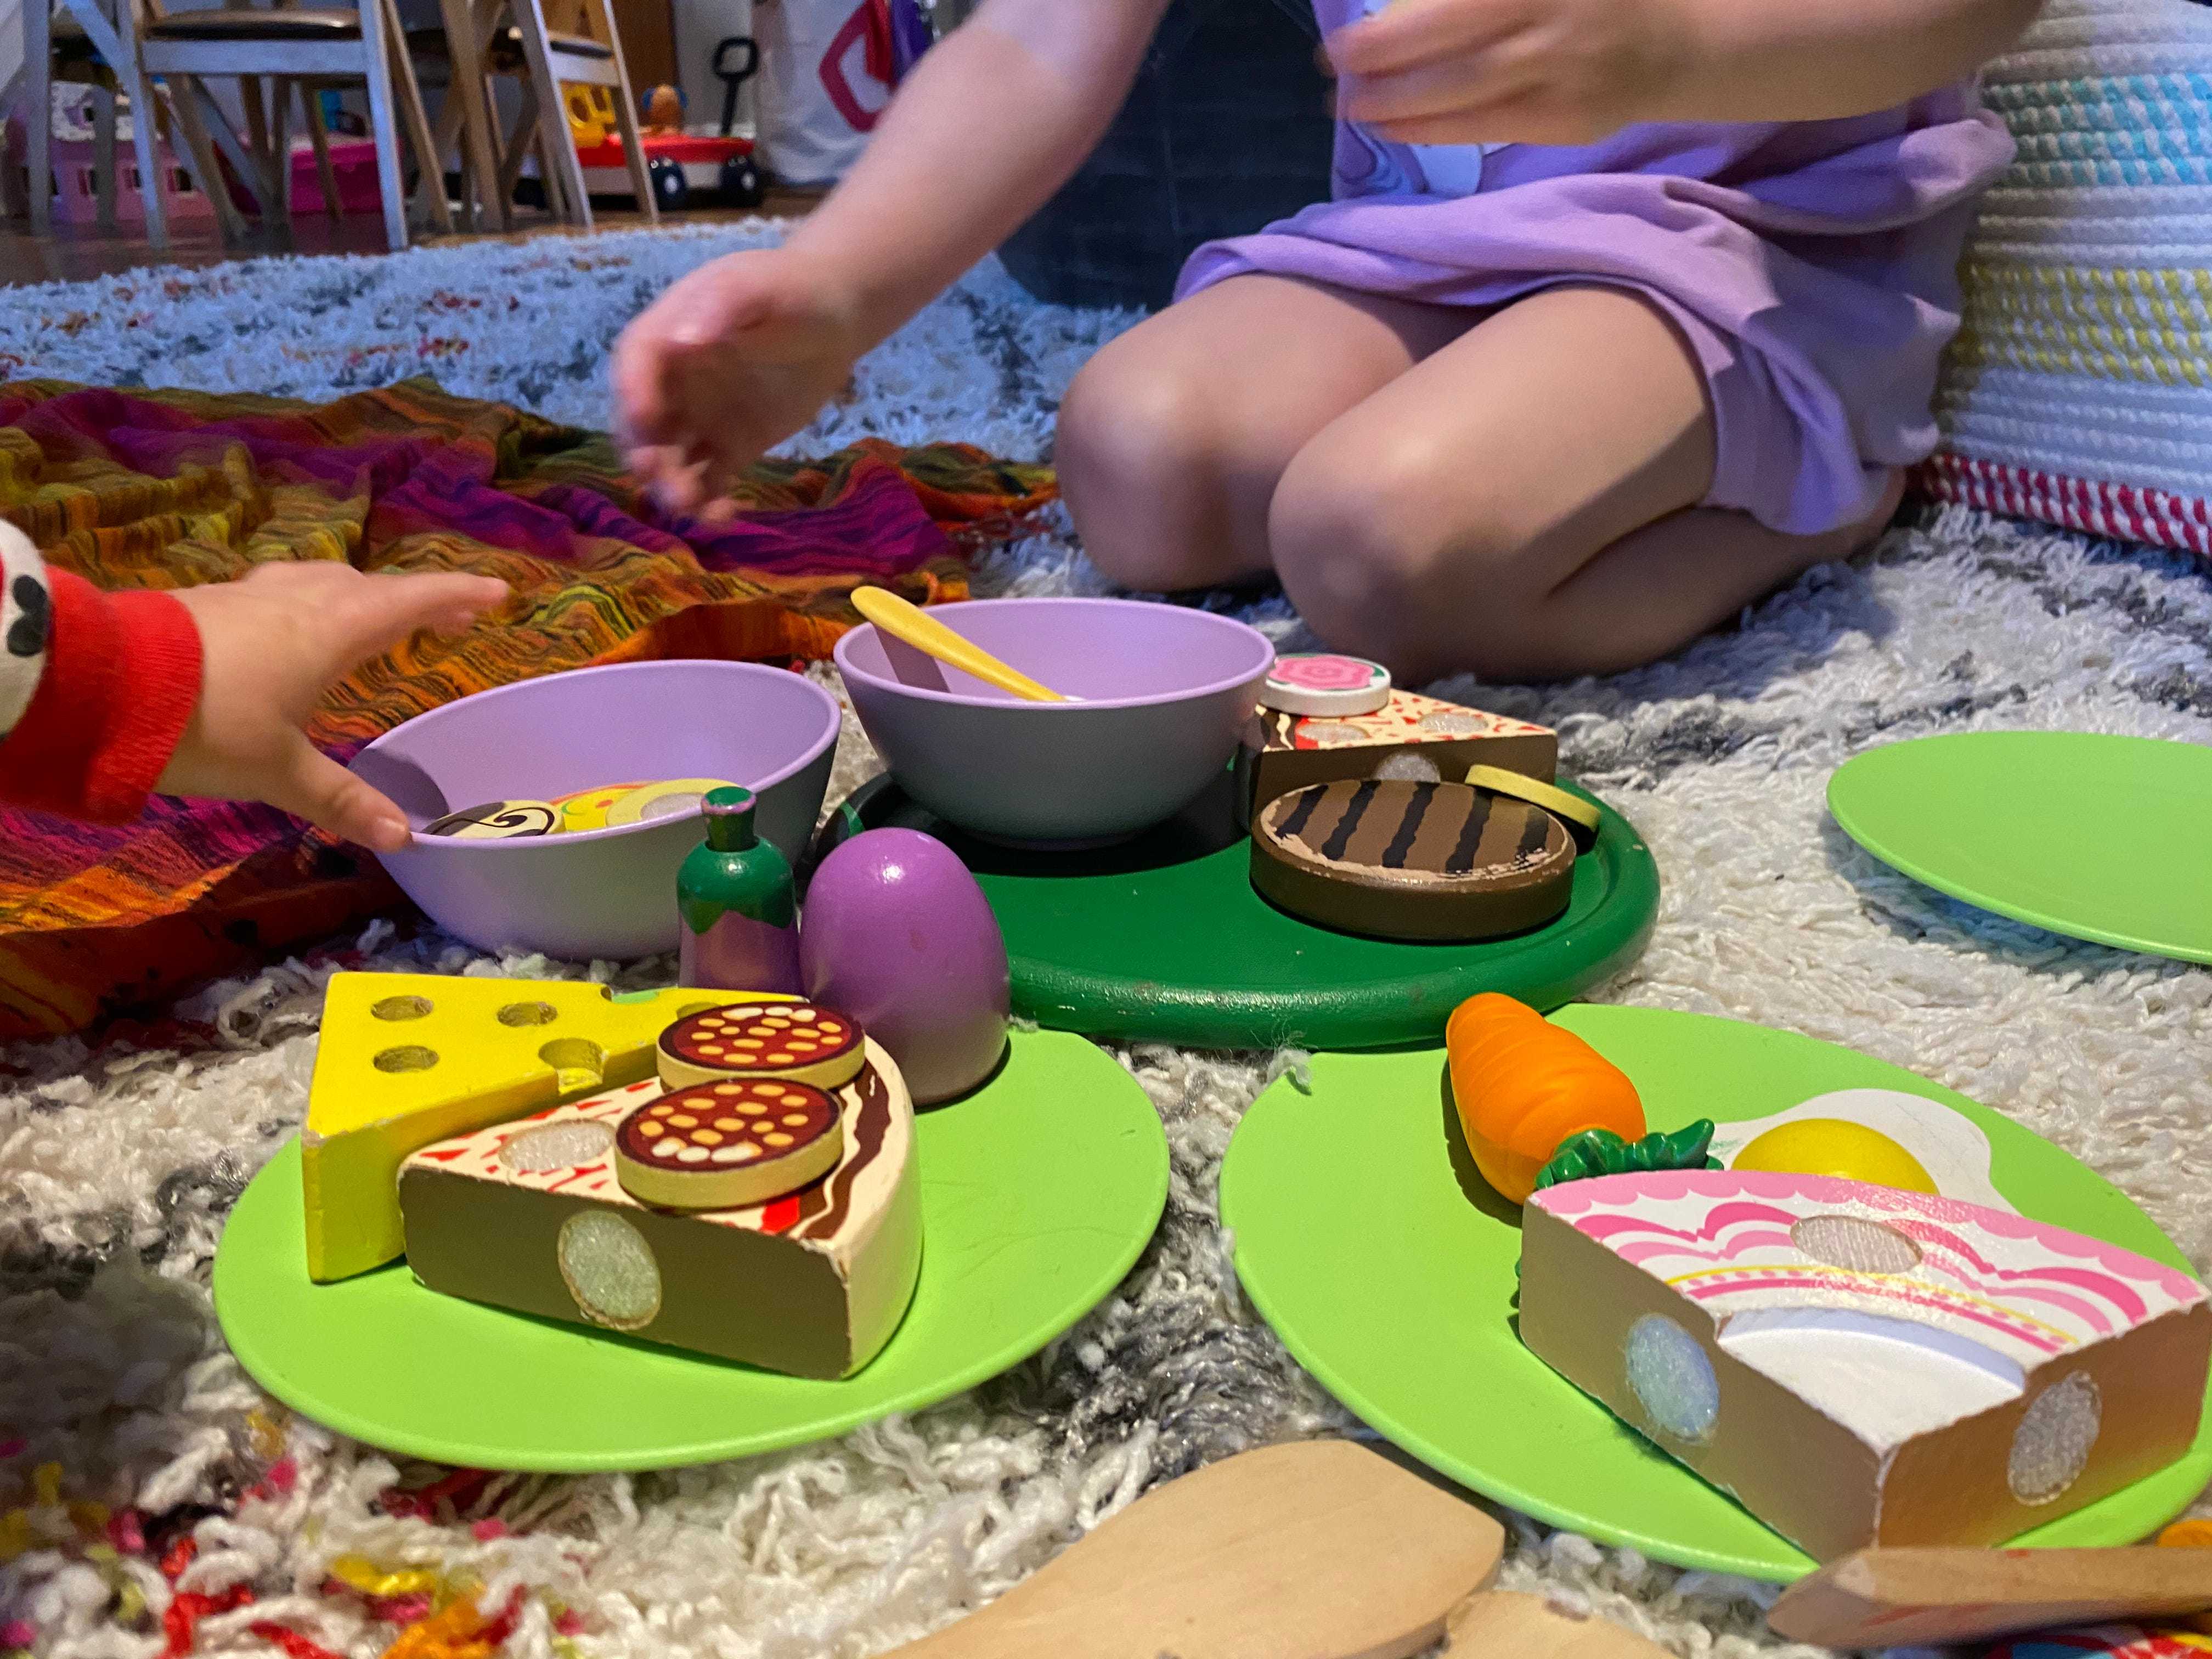 Green Toys Kids Dish Set review: an eco-friendly toy dish set for kids